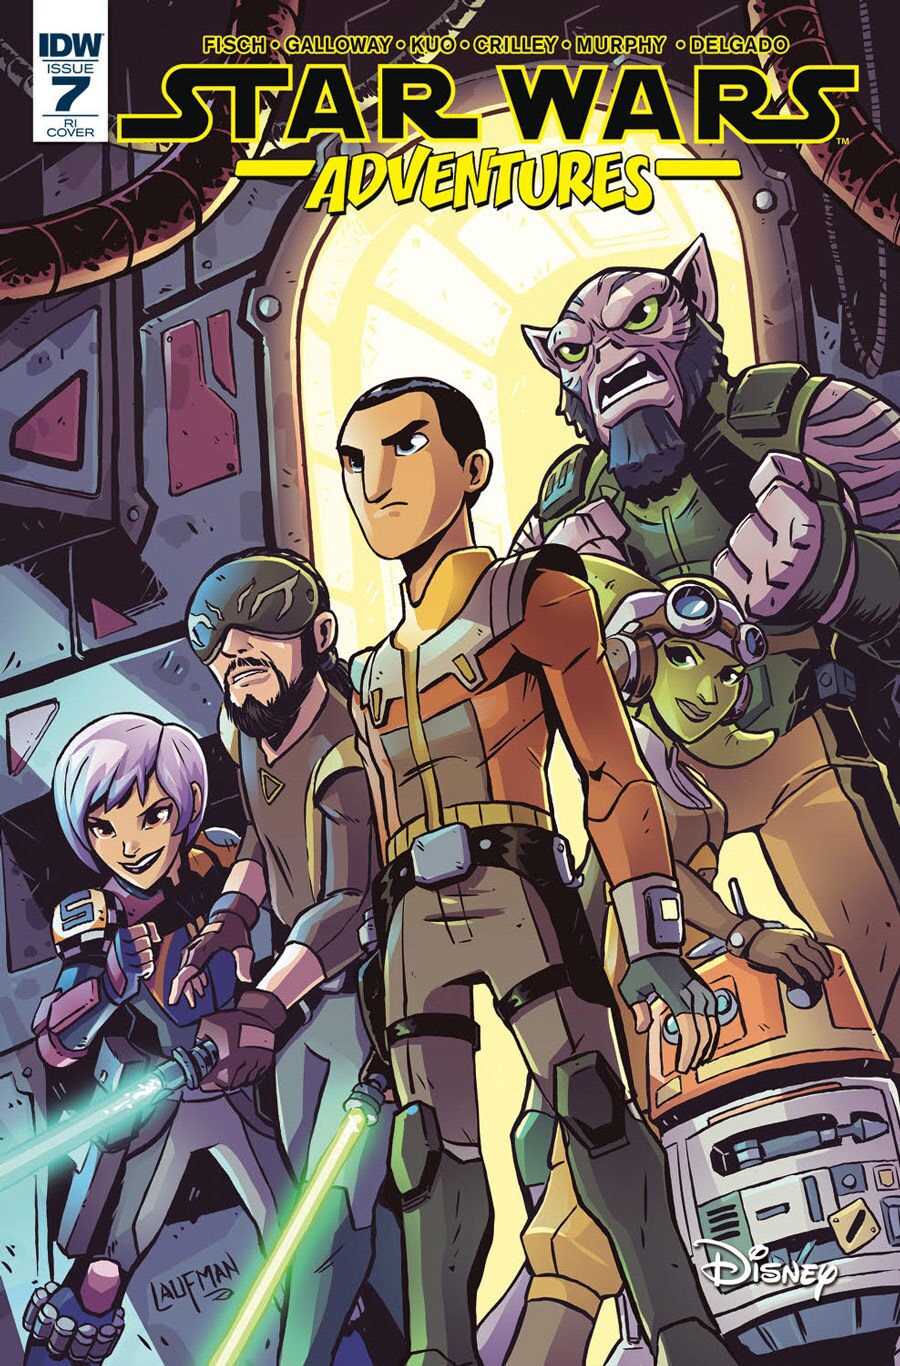 The cover of issue #7 of the IDW Publishing comic book series Star Wars Adventures features Ezra and Kanan wielding lightsabers and standing with Sabine, Hera, Chopper, and Zeb.